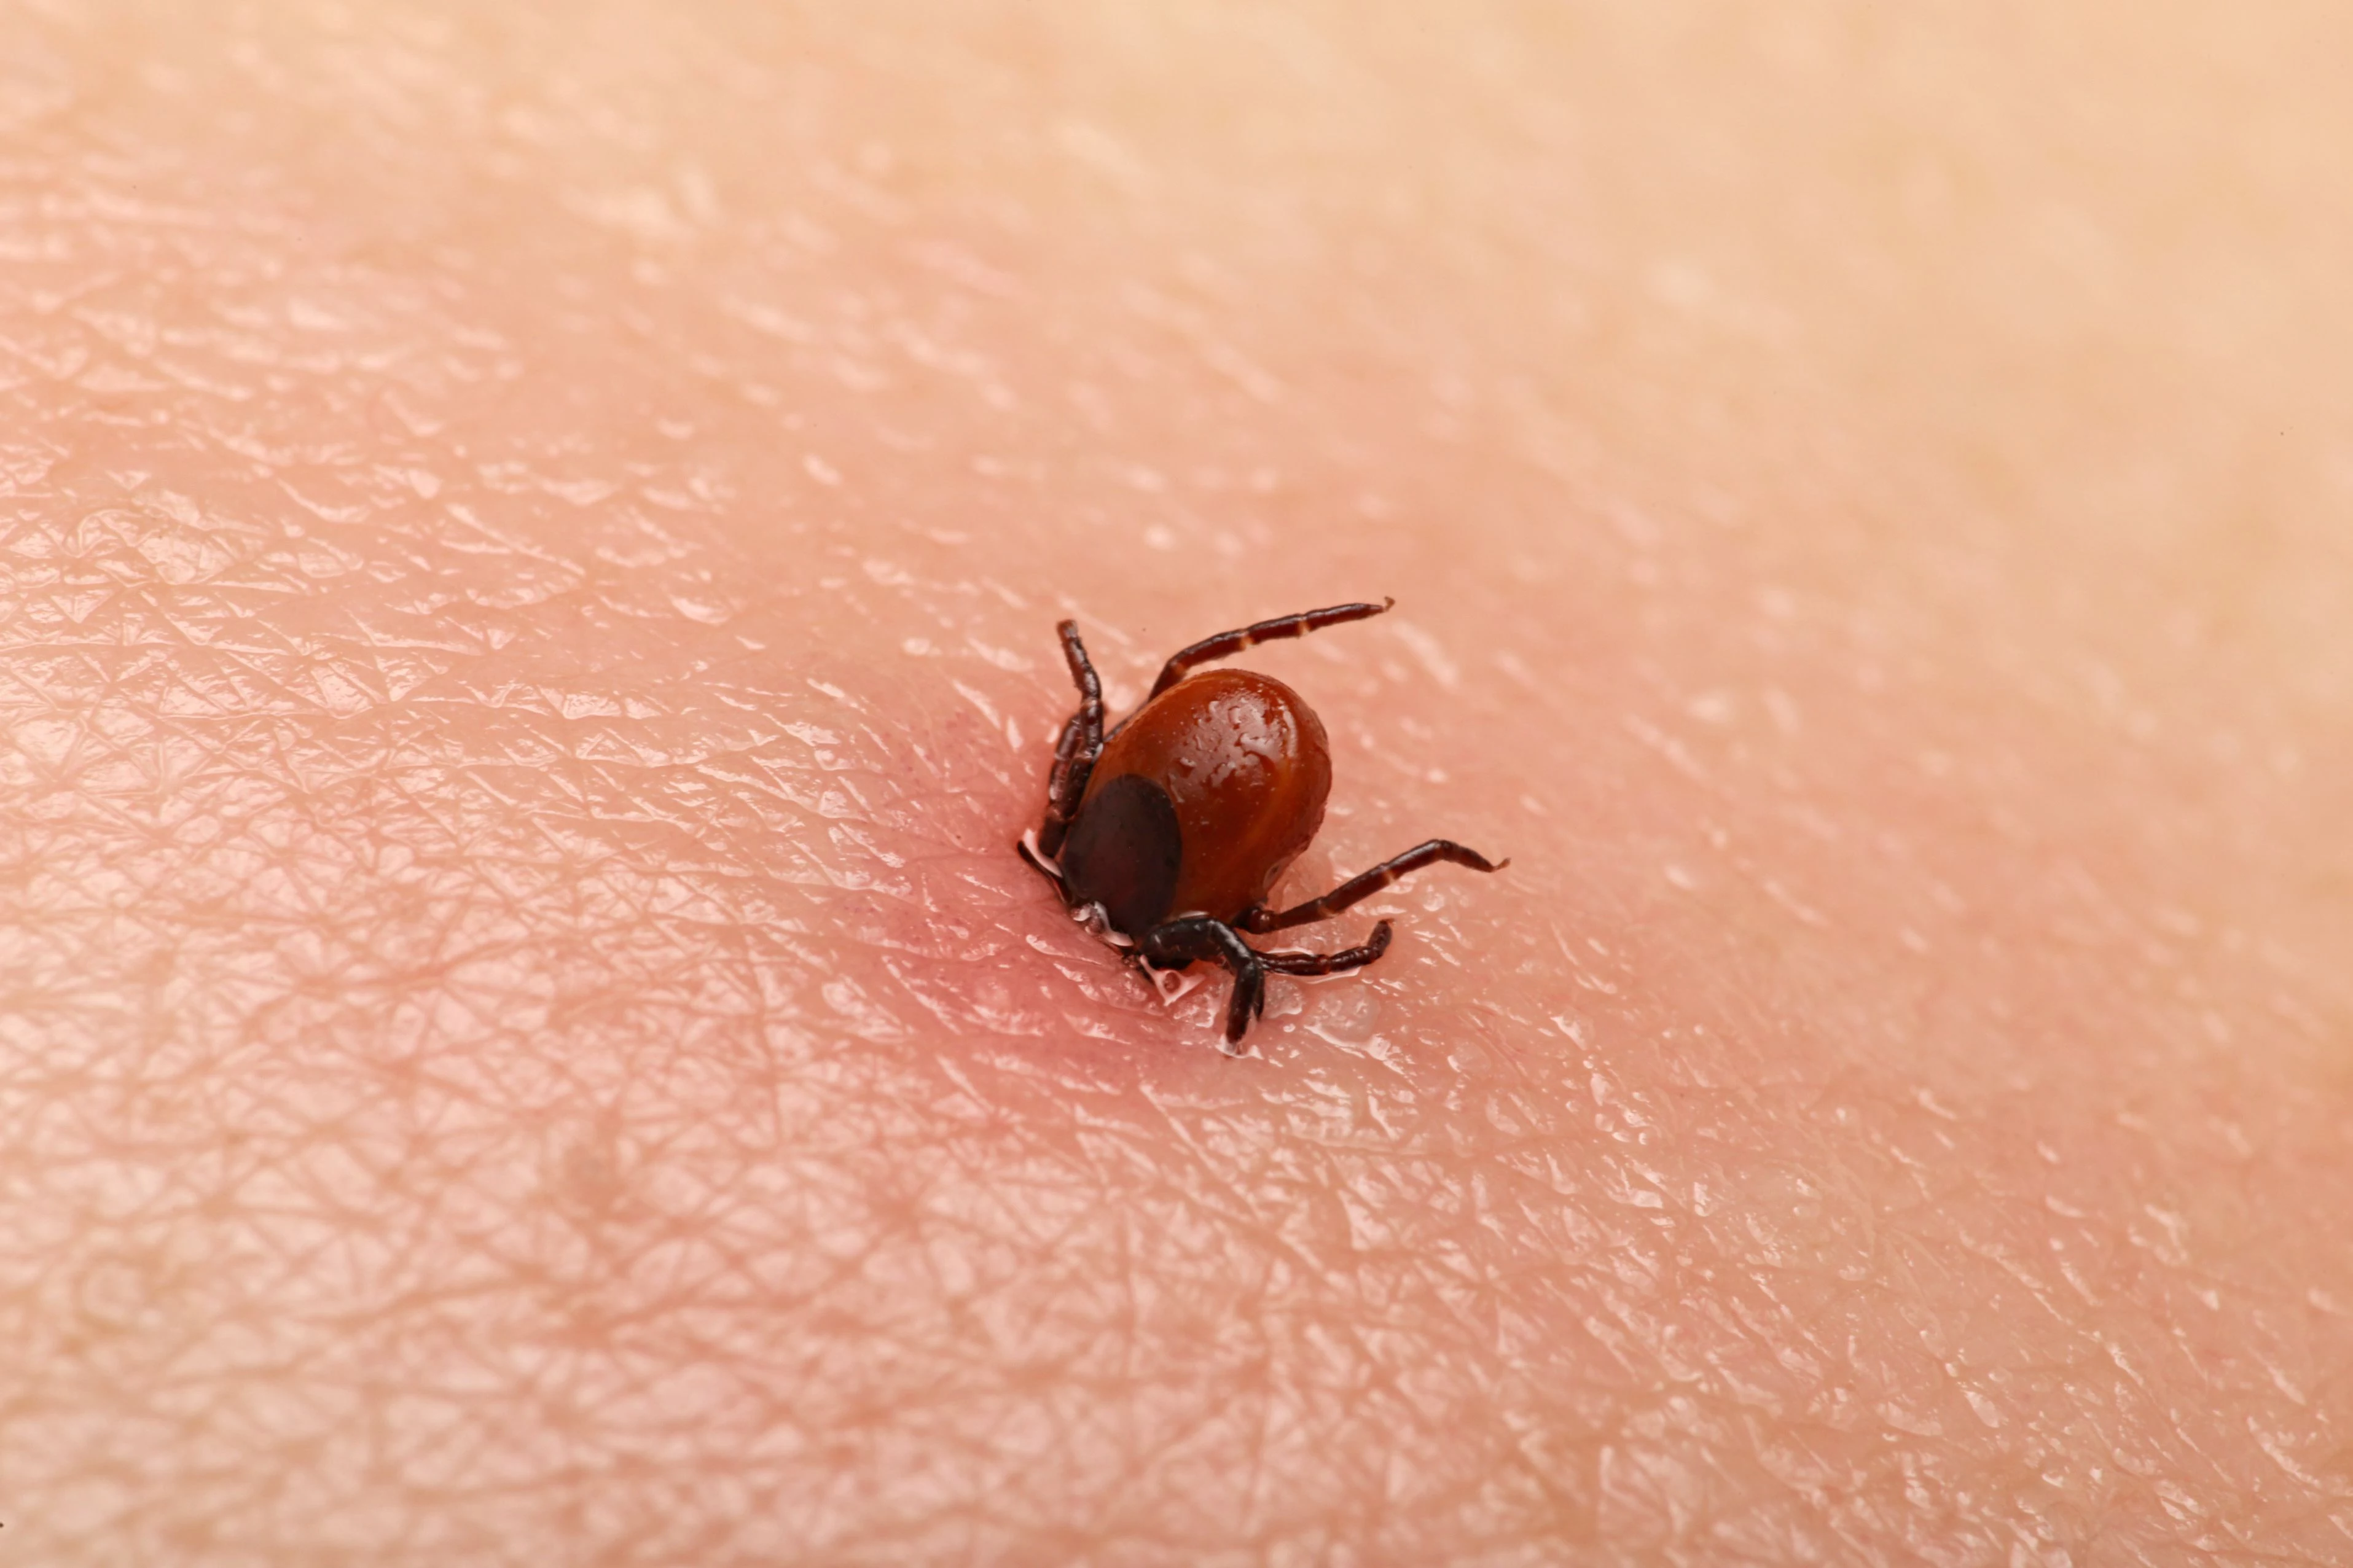 how to kill a tick tick burrowed in skin